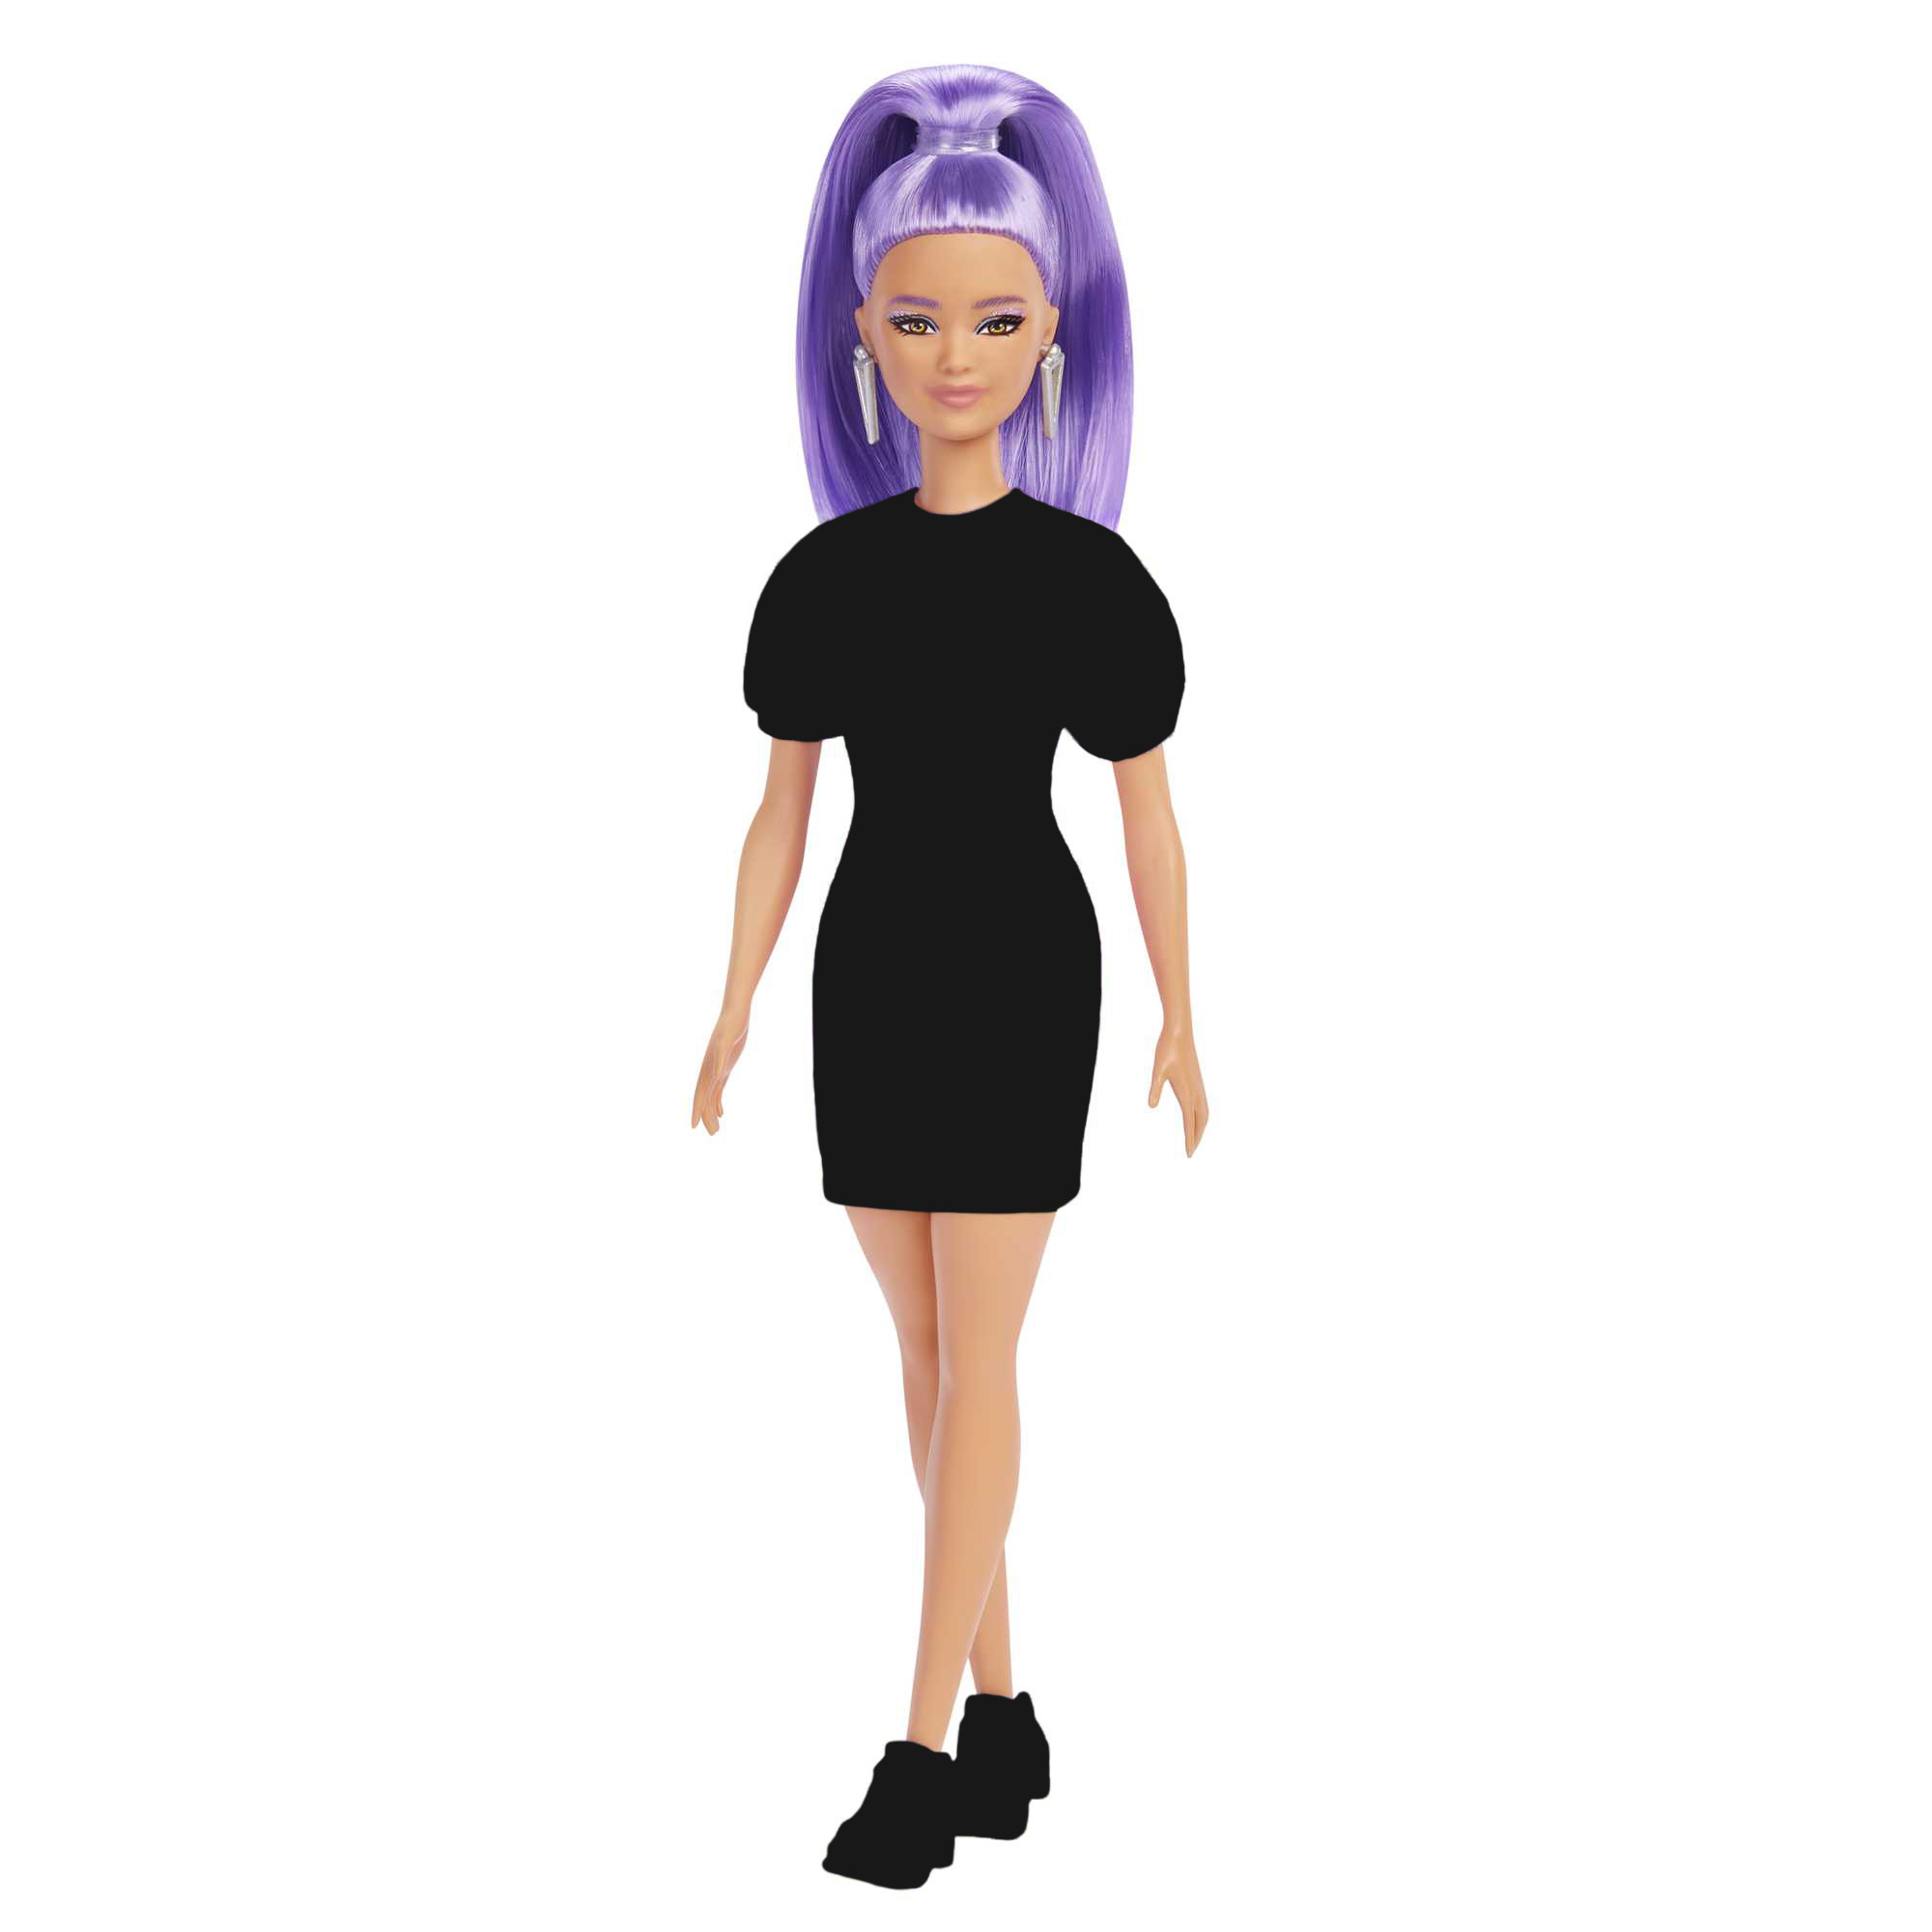 Barbie Styled By You con capelli viola - Barbie